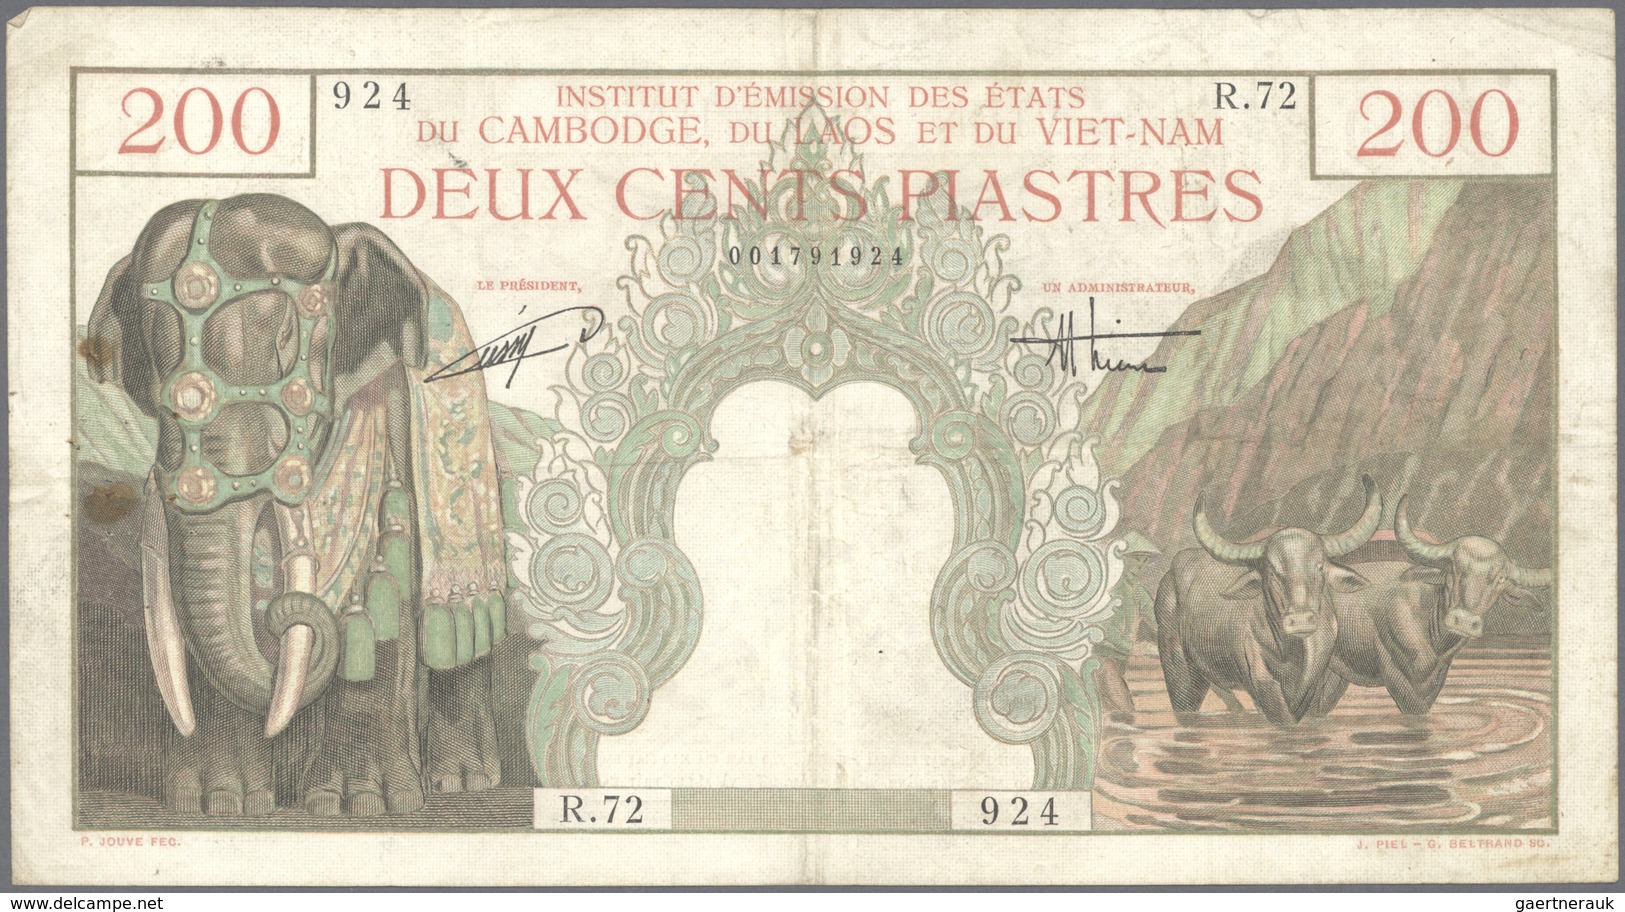 01541 French Indochina / Französisch Indochina: Set Of 3 Large Size Banknotes Containing 20 Piastres P. 50 - Indochina